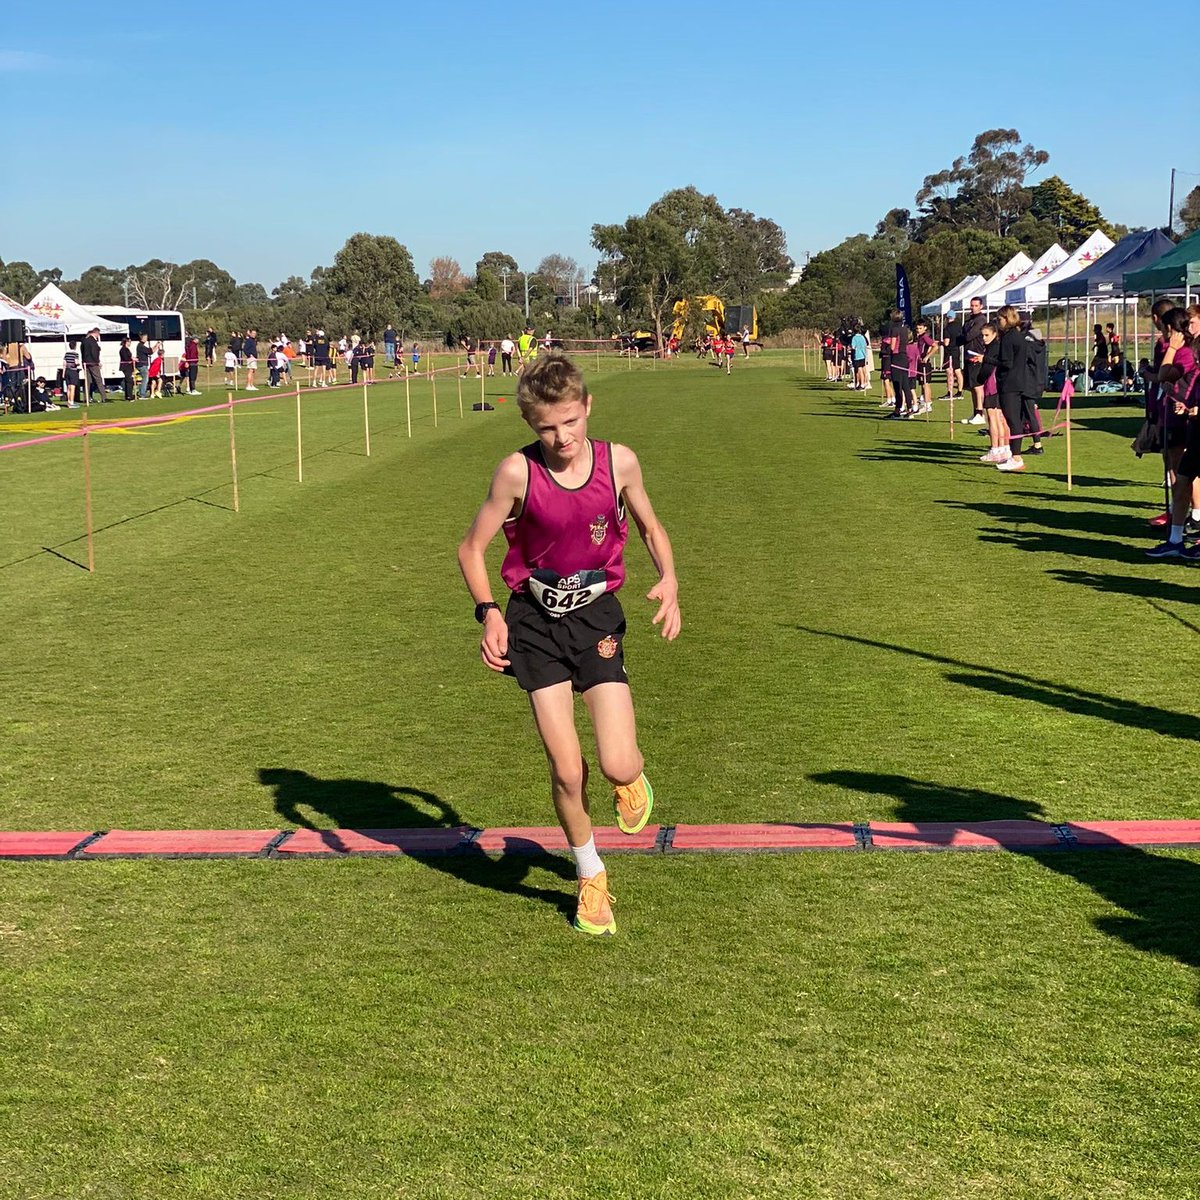 Placegetters for the 12-13 Yr Boys event at the @APS_Sport Primary Div Cross Country at @Haileybury Berwick today!

Great to see so many students participating on a glorious afternoon!

Well done Boys!!👏👏👏

#apssport #APS #apscrosscountry #schoolsport